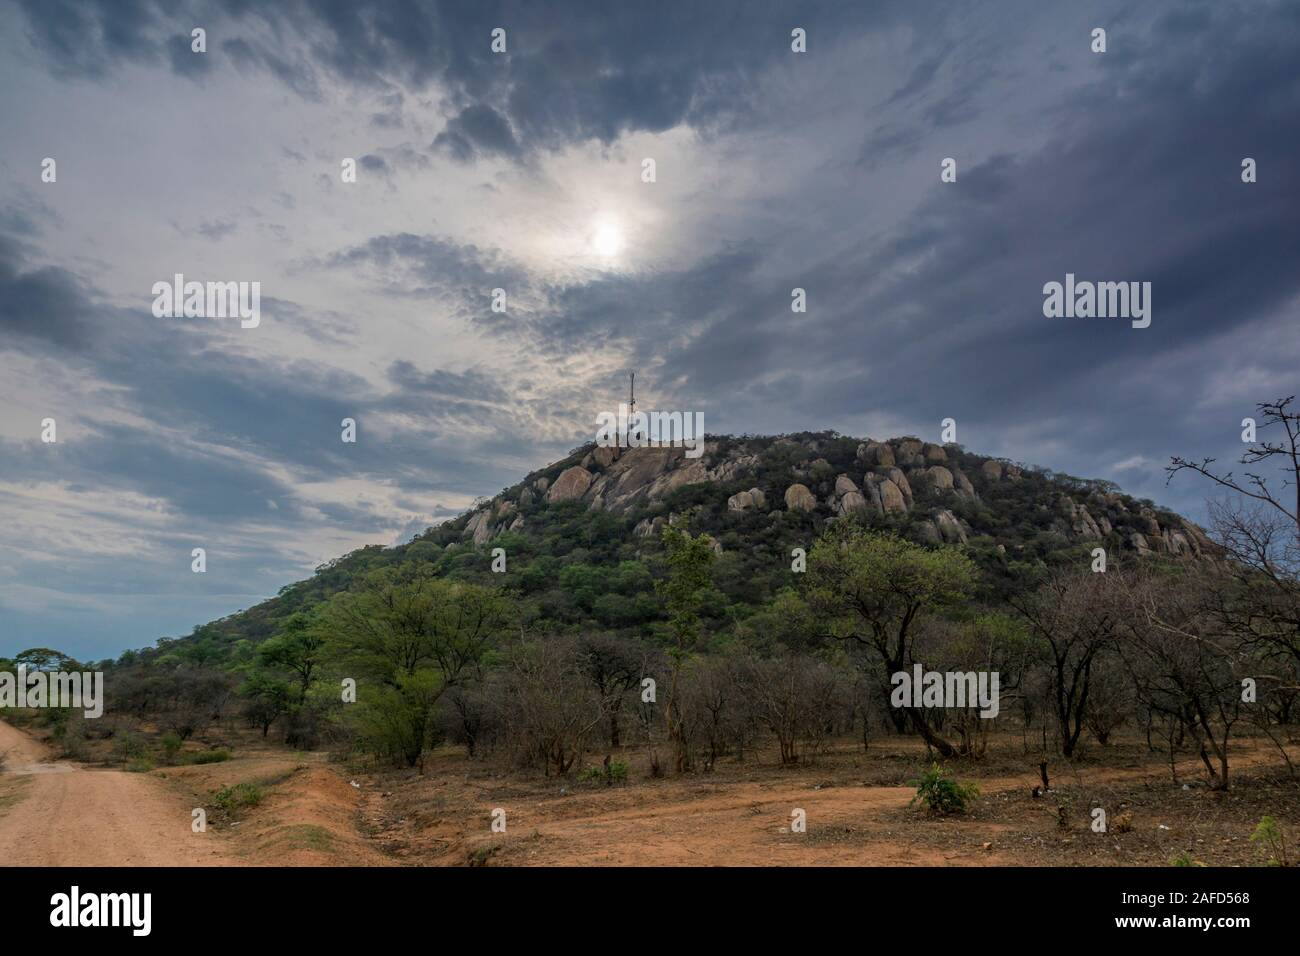 PZimbabwe. Dzapasi Assembly point (AP Foxtrot) national monument, at the site of the largest guerilla assembly point after the 1979 ceasefire between the Zimbabwe-Rhodesia government and the ZANLA and ZIPRA guerilla movements. Stock Photo